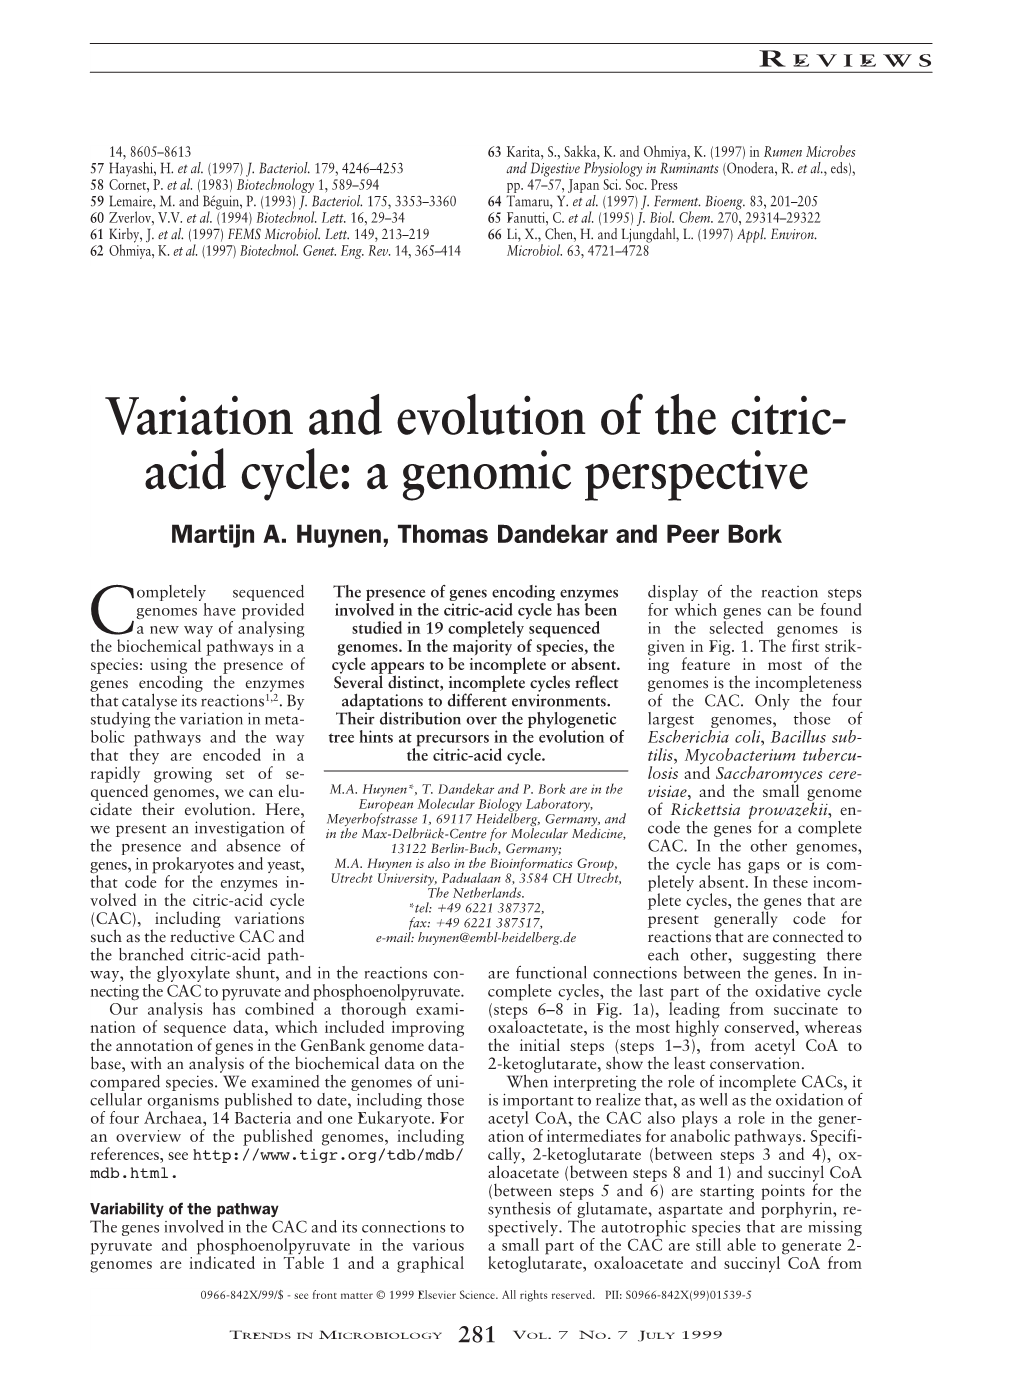 Variation and Evolution of the Citric- Acid Cycle: a Genomic Perspective Martijn A